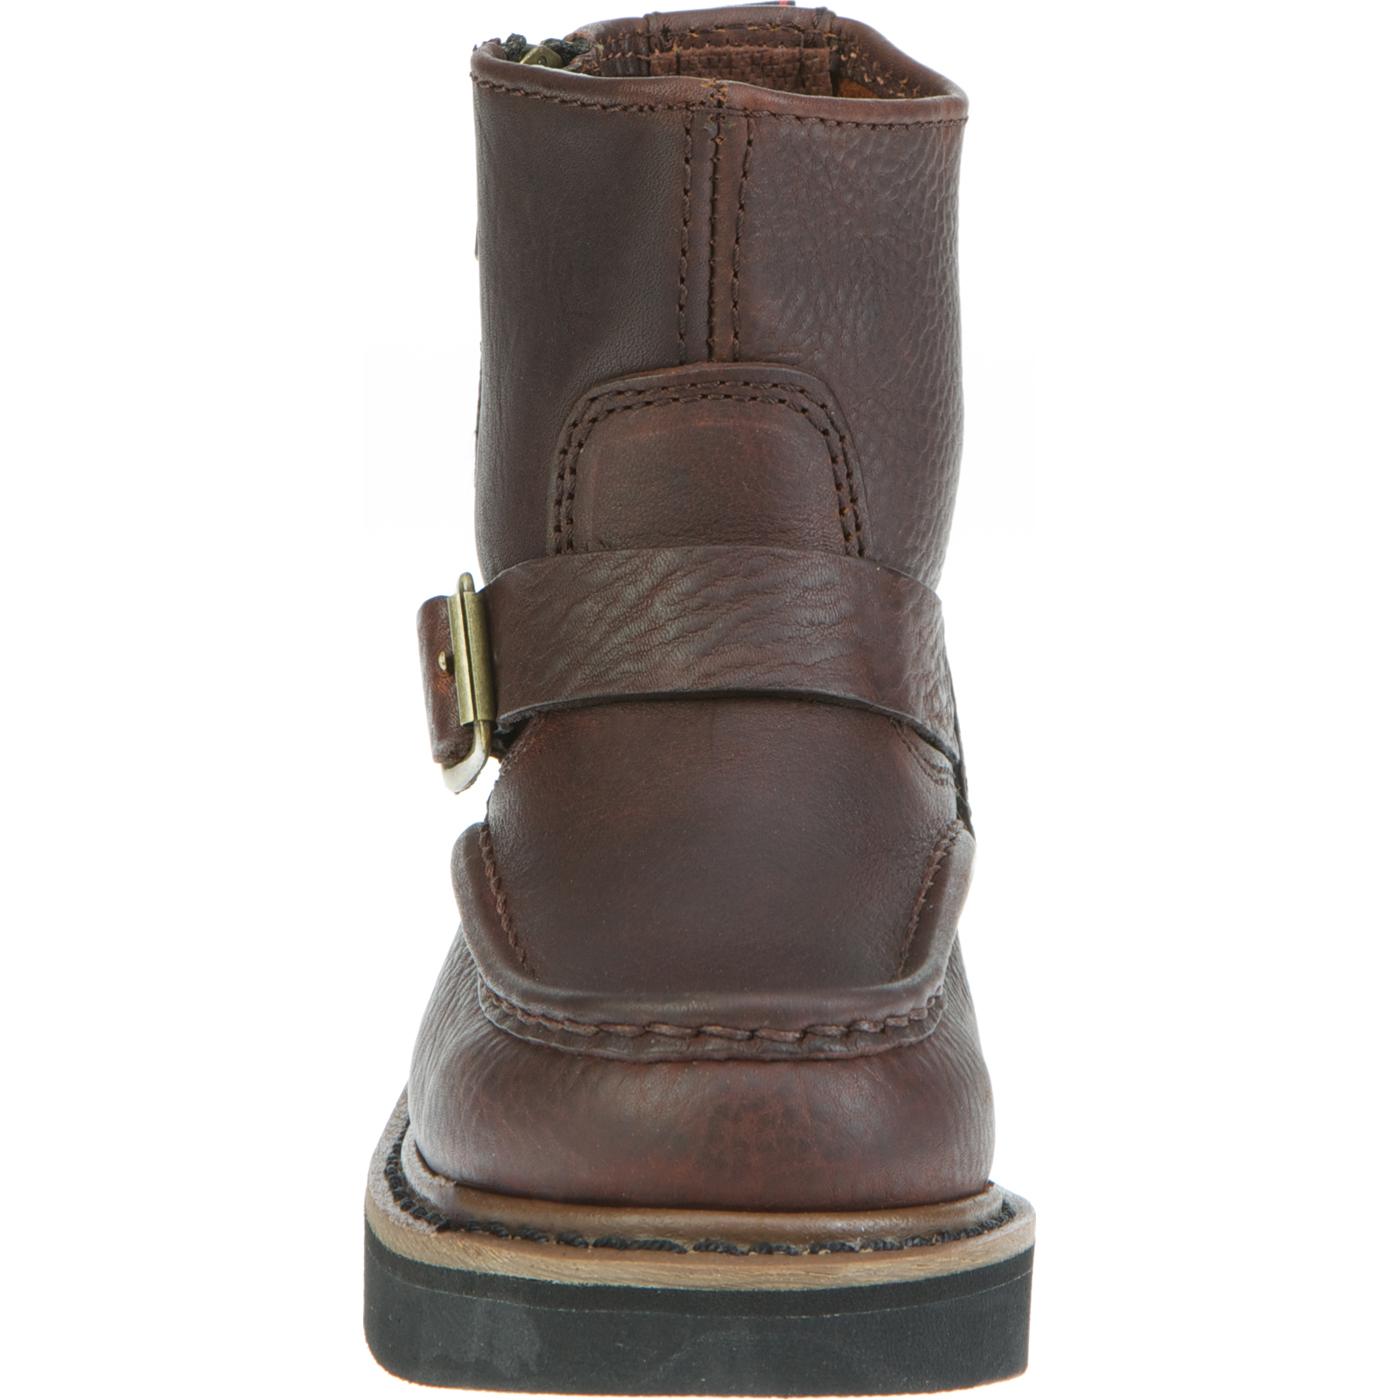 Georgia Boot: Kids' Side-Zip Wellington Boot with strap